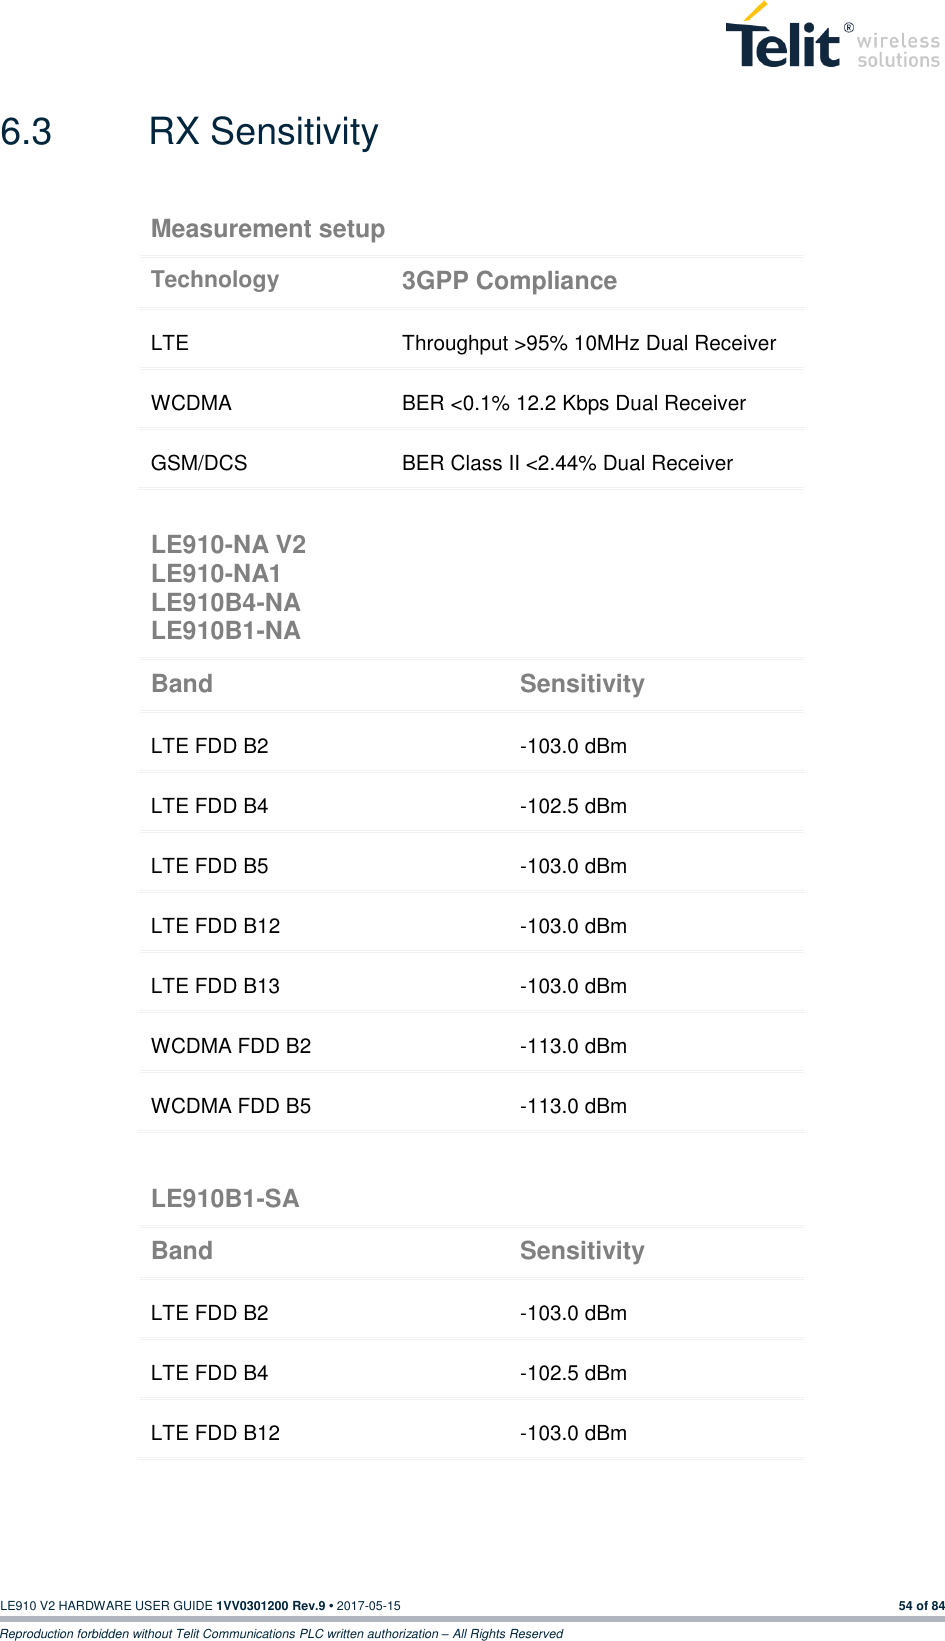   LE910 V2 HARDWARE USER GUIDE 1VV0301200 Rev.9 • 2017-05-15 54 of 84 Reproduction forbidden without Telit Communications PLC written authorization – All Rights Reserved 6.3  RX Sensitivity                               Measurement setup Technology 3GPP Compliance LTE Throughput &gt;95% 10MHz Dual Receiver WCDMA BER &lt;0.1% 12.2 Kbps Dual Receiver GSM/DCS BER Class II &lt;2.44% Dual Receiver LE910-NA V2 LE910-NA1 LE910B4-NA LE910B1-NA Band Sensitivity LTE FDD B2 -103.0 dBm LTE FDD B4 -102.5 dBm LTE FDD B5 -103.0 dBm LTE FDD B12 -103.0 dBm LTE FDD B13 -103.0 dBm WCDMA FDD B2 -113.0 dBm WCDMA FDD B5 -113.0 dBm LE910B1-SA Band Sensitivity LTE FDD B2 -103.0 dBm LTE FDD B4 -102.5 dBm LTE FDD B12 -103.0 dBm 